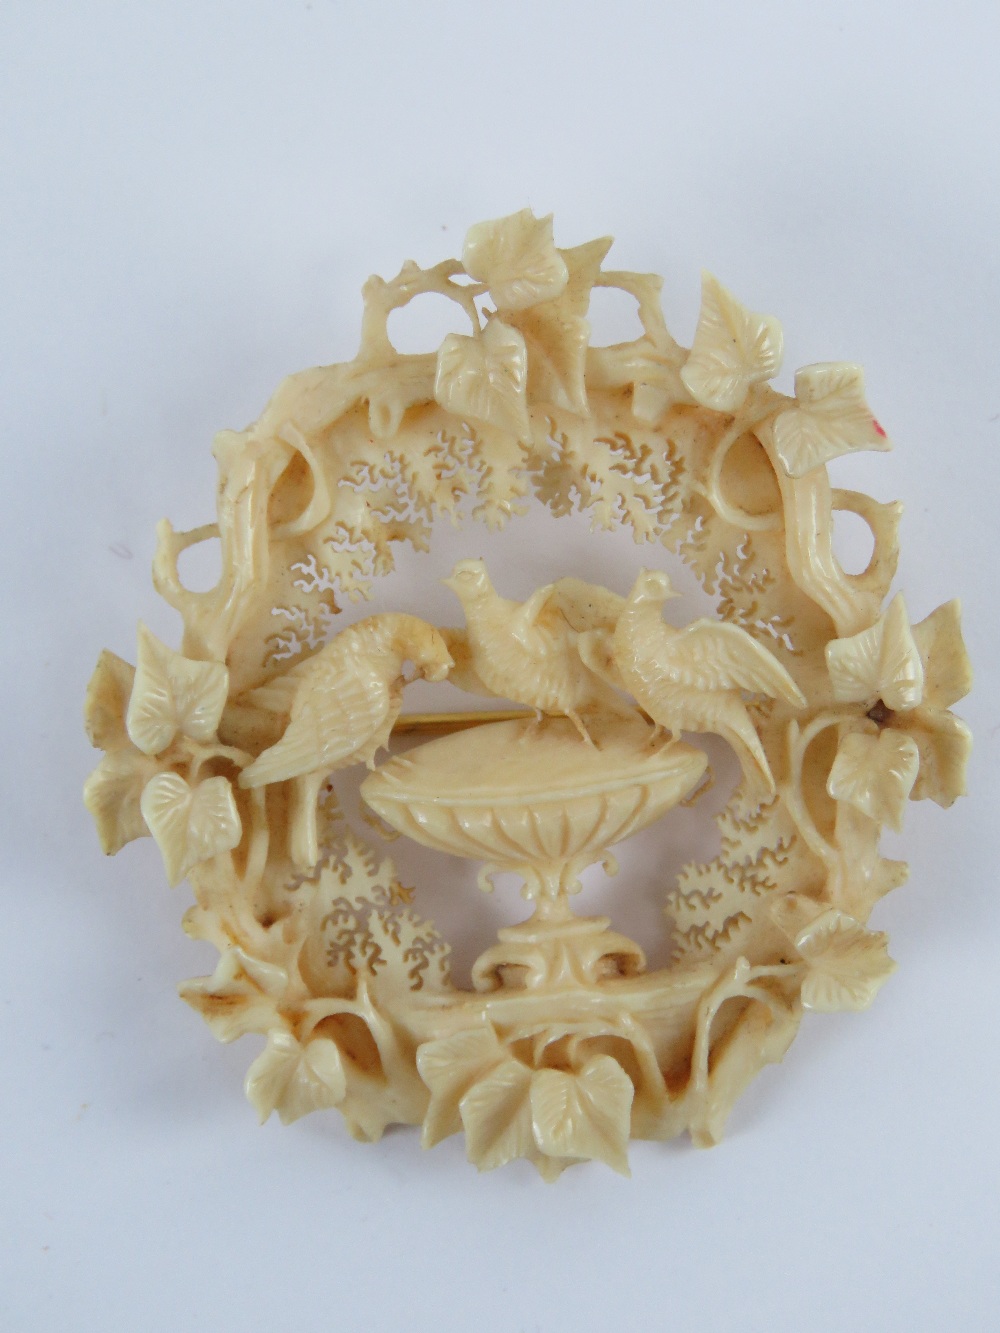 A superbly detailed 19th century carved ivory brooch having central Pliny doves stood upon a - Image 2 of 4